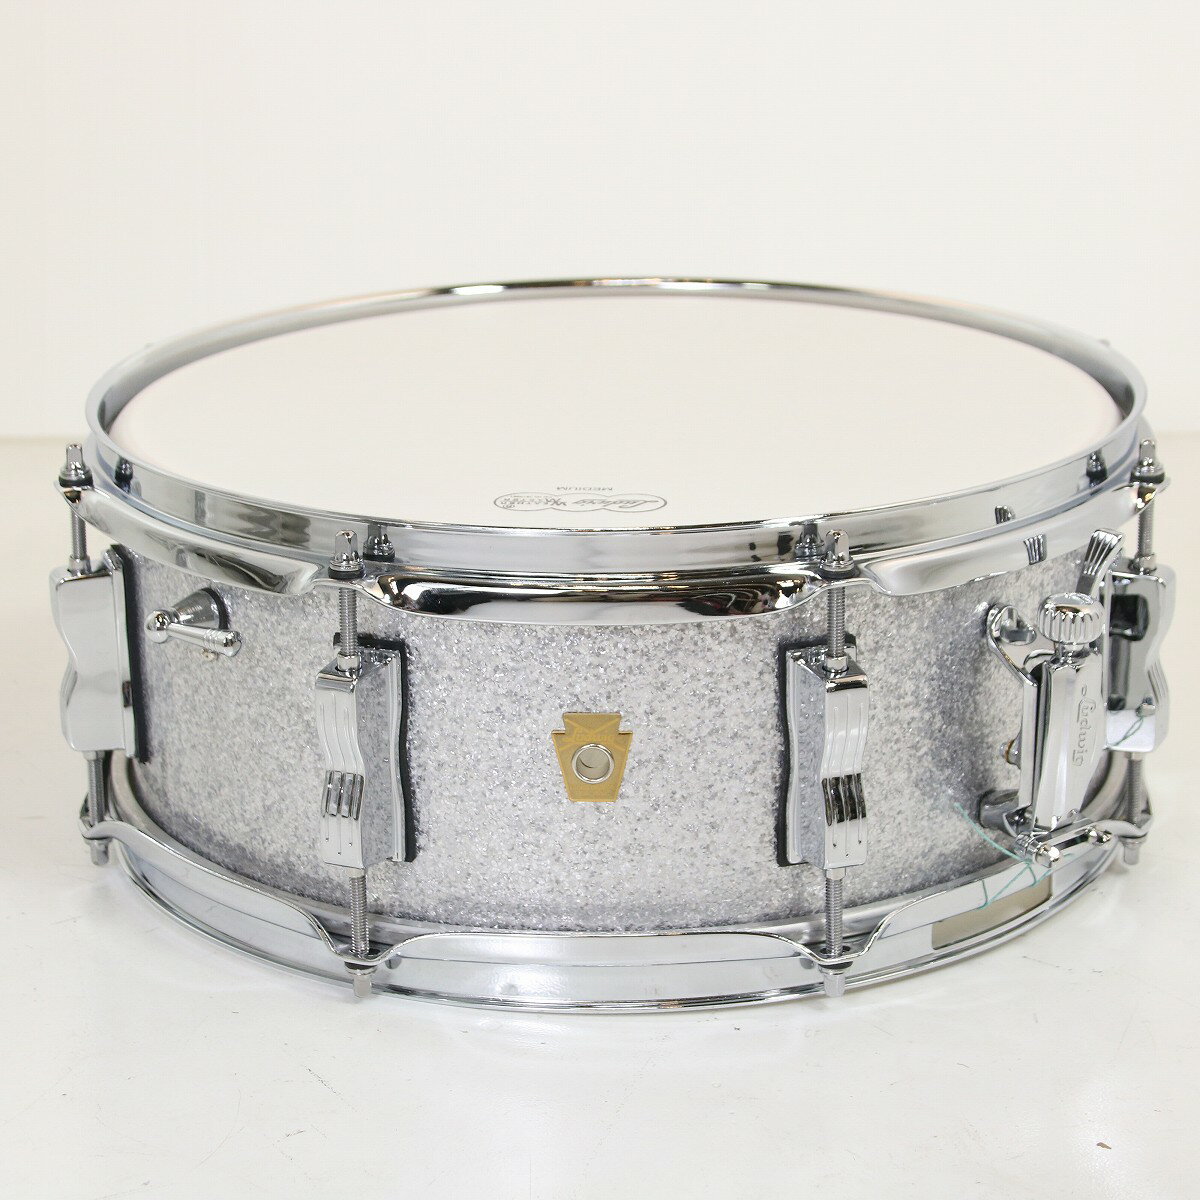 Ludwig / LS908 0S JAZZ FEST Snare Drum 14x5.5 Silver Sparkle 《国内正規品・純正ソフトケース付き》【お取寄品】